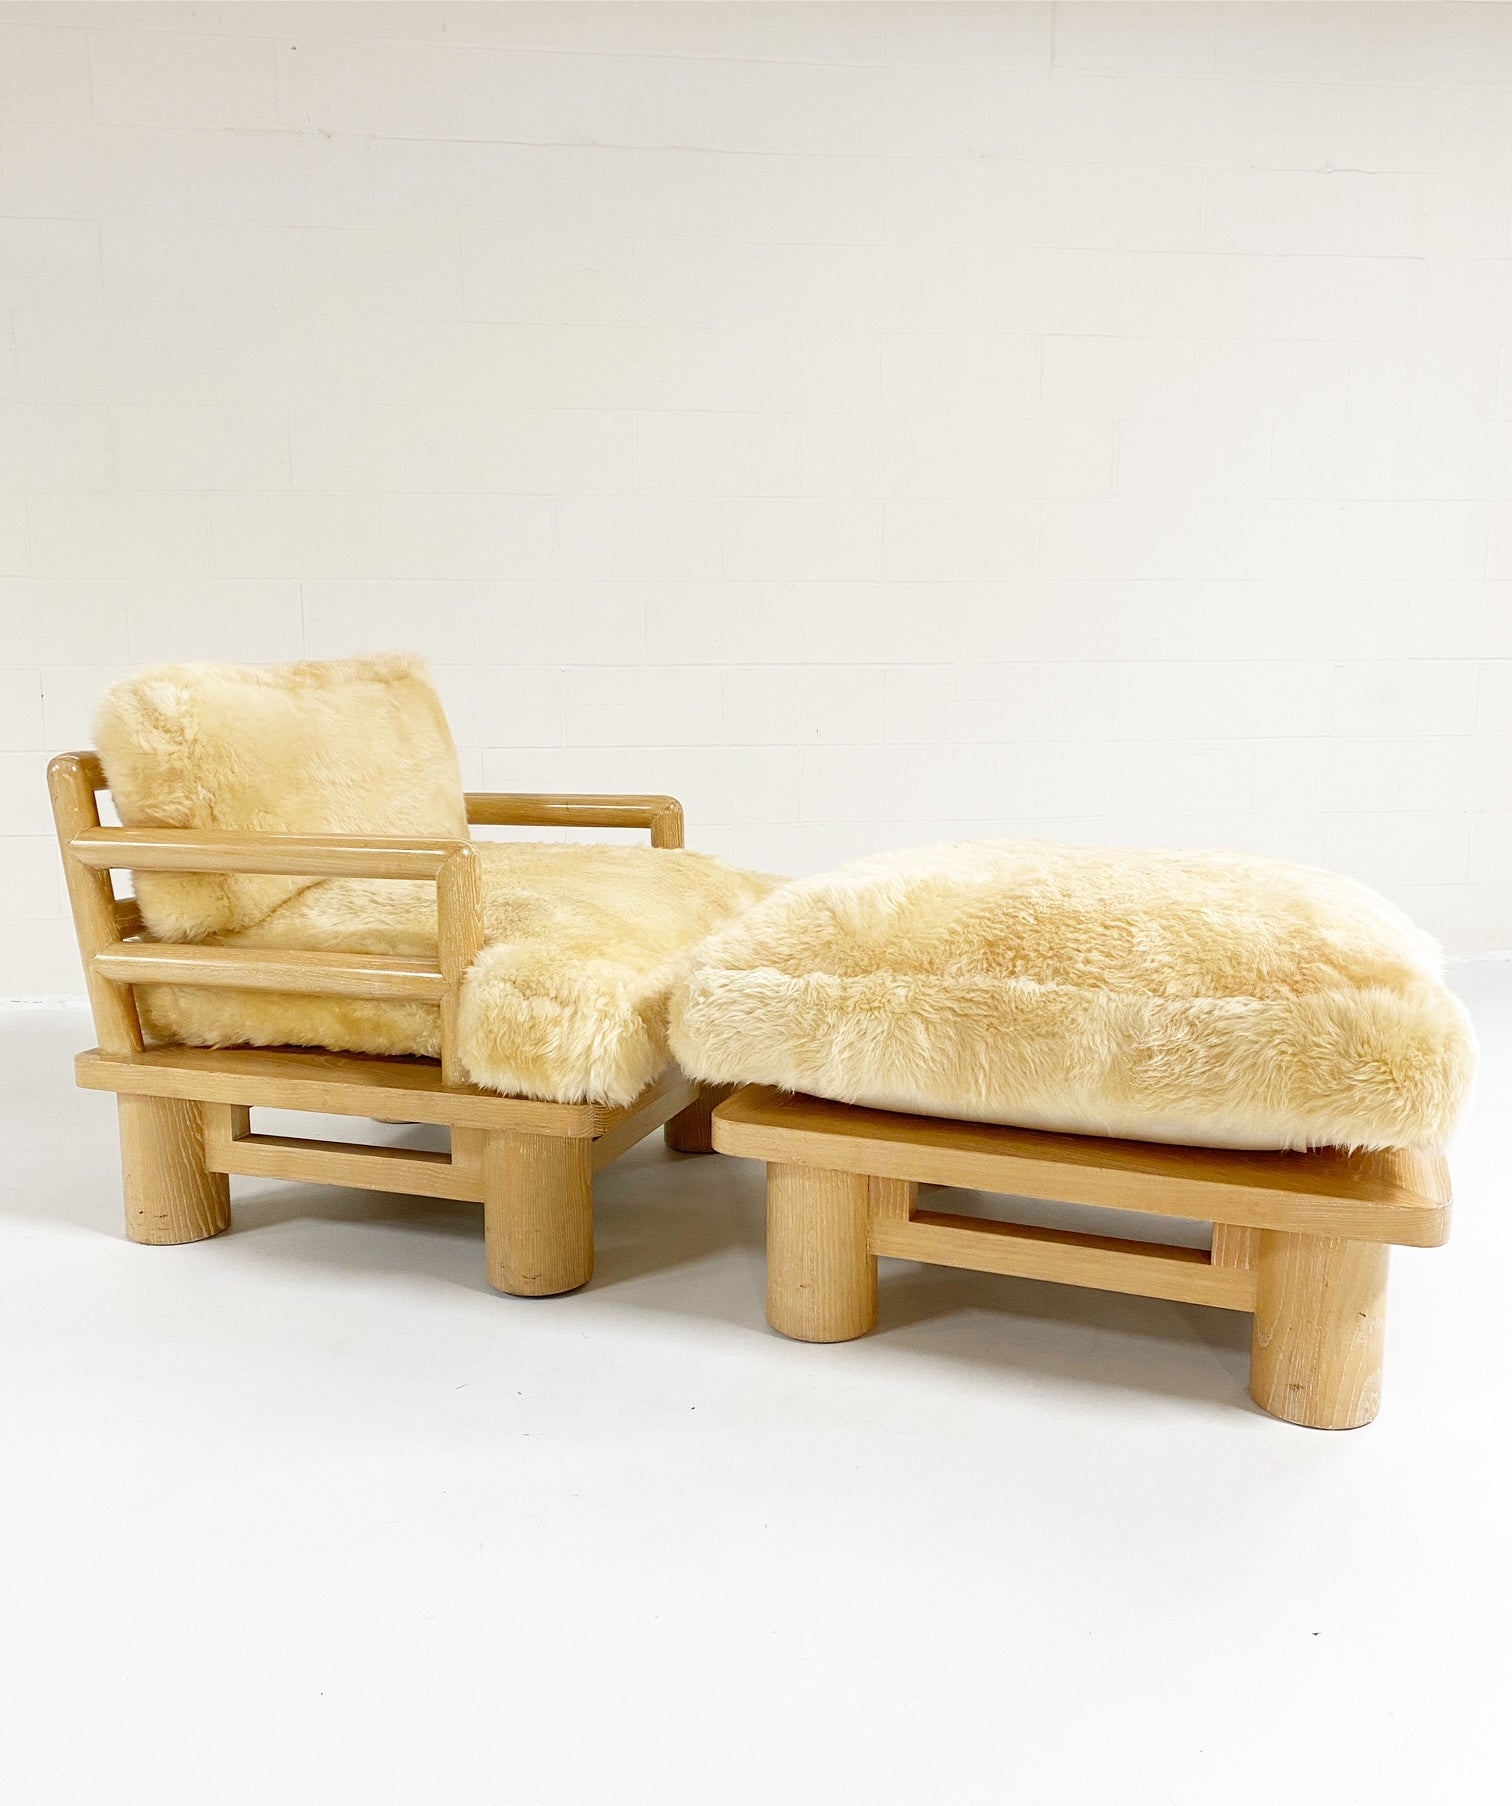 Dowelwood Lounge Chair and Ottoman